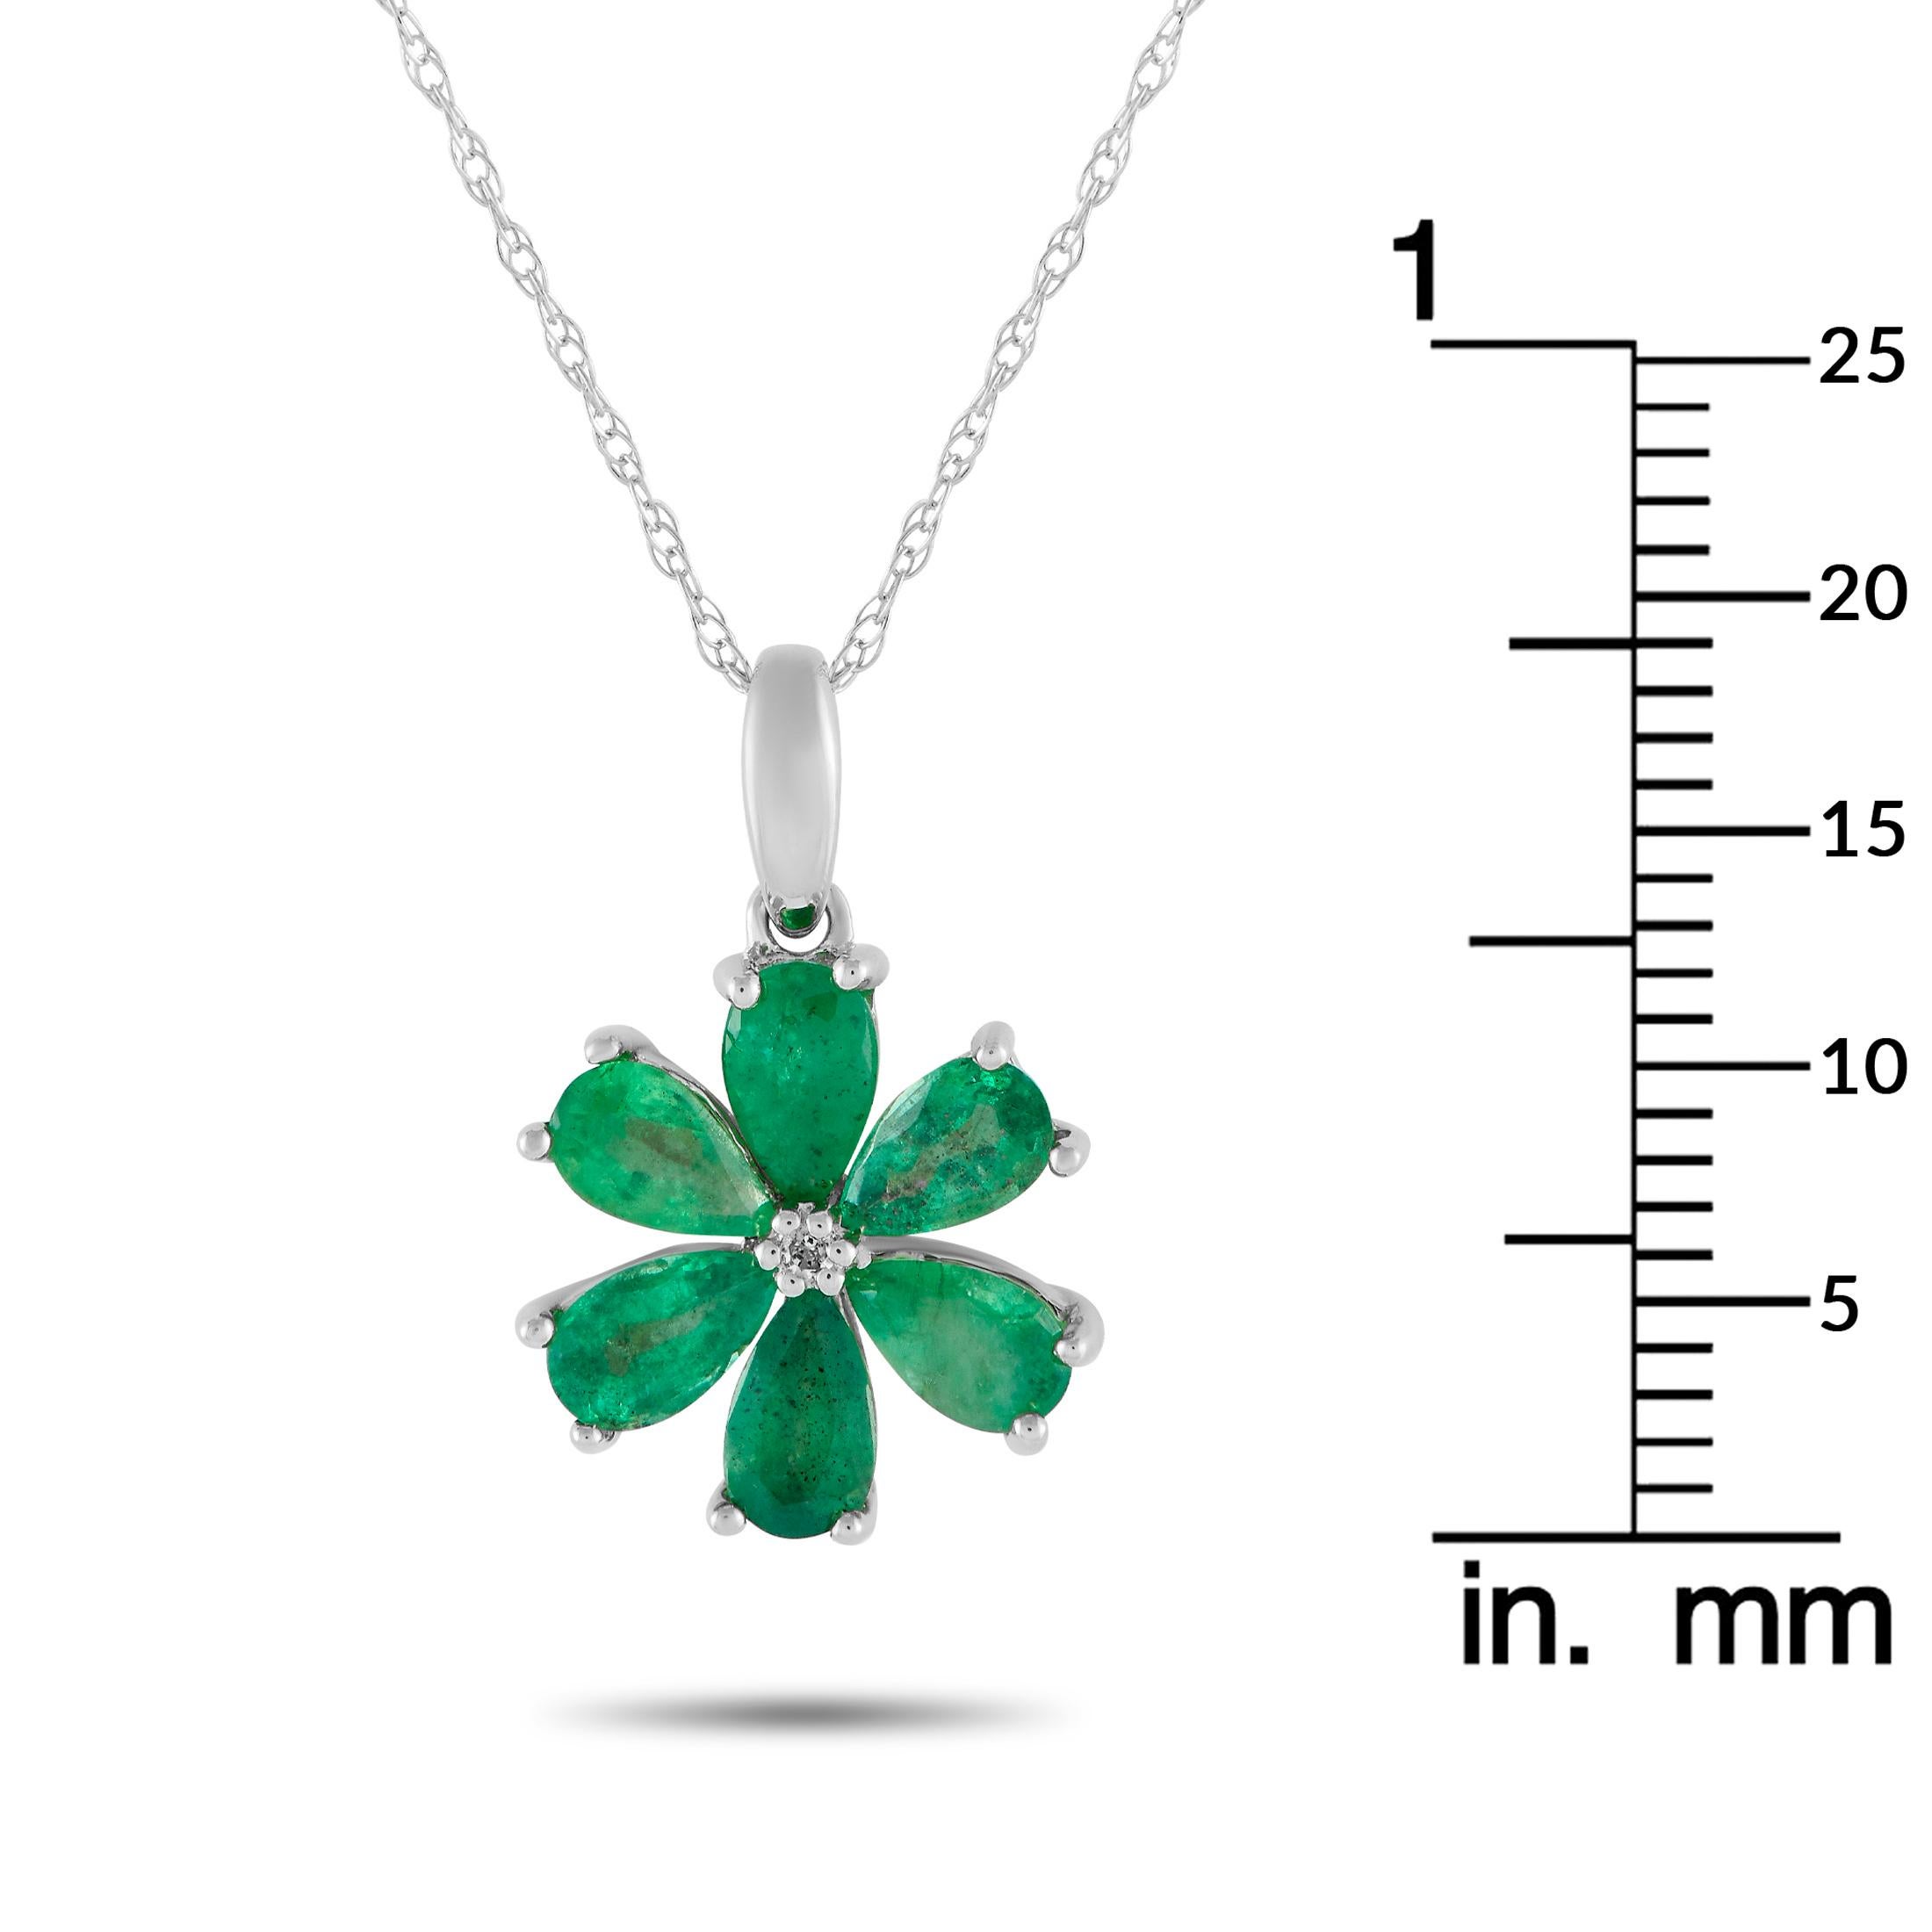 LB Exclusive 14K White Gold 0.01ct Diamond & Emerald Flower Necklace PS01-110723 In New Condition For Sale In Southampton, PA